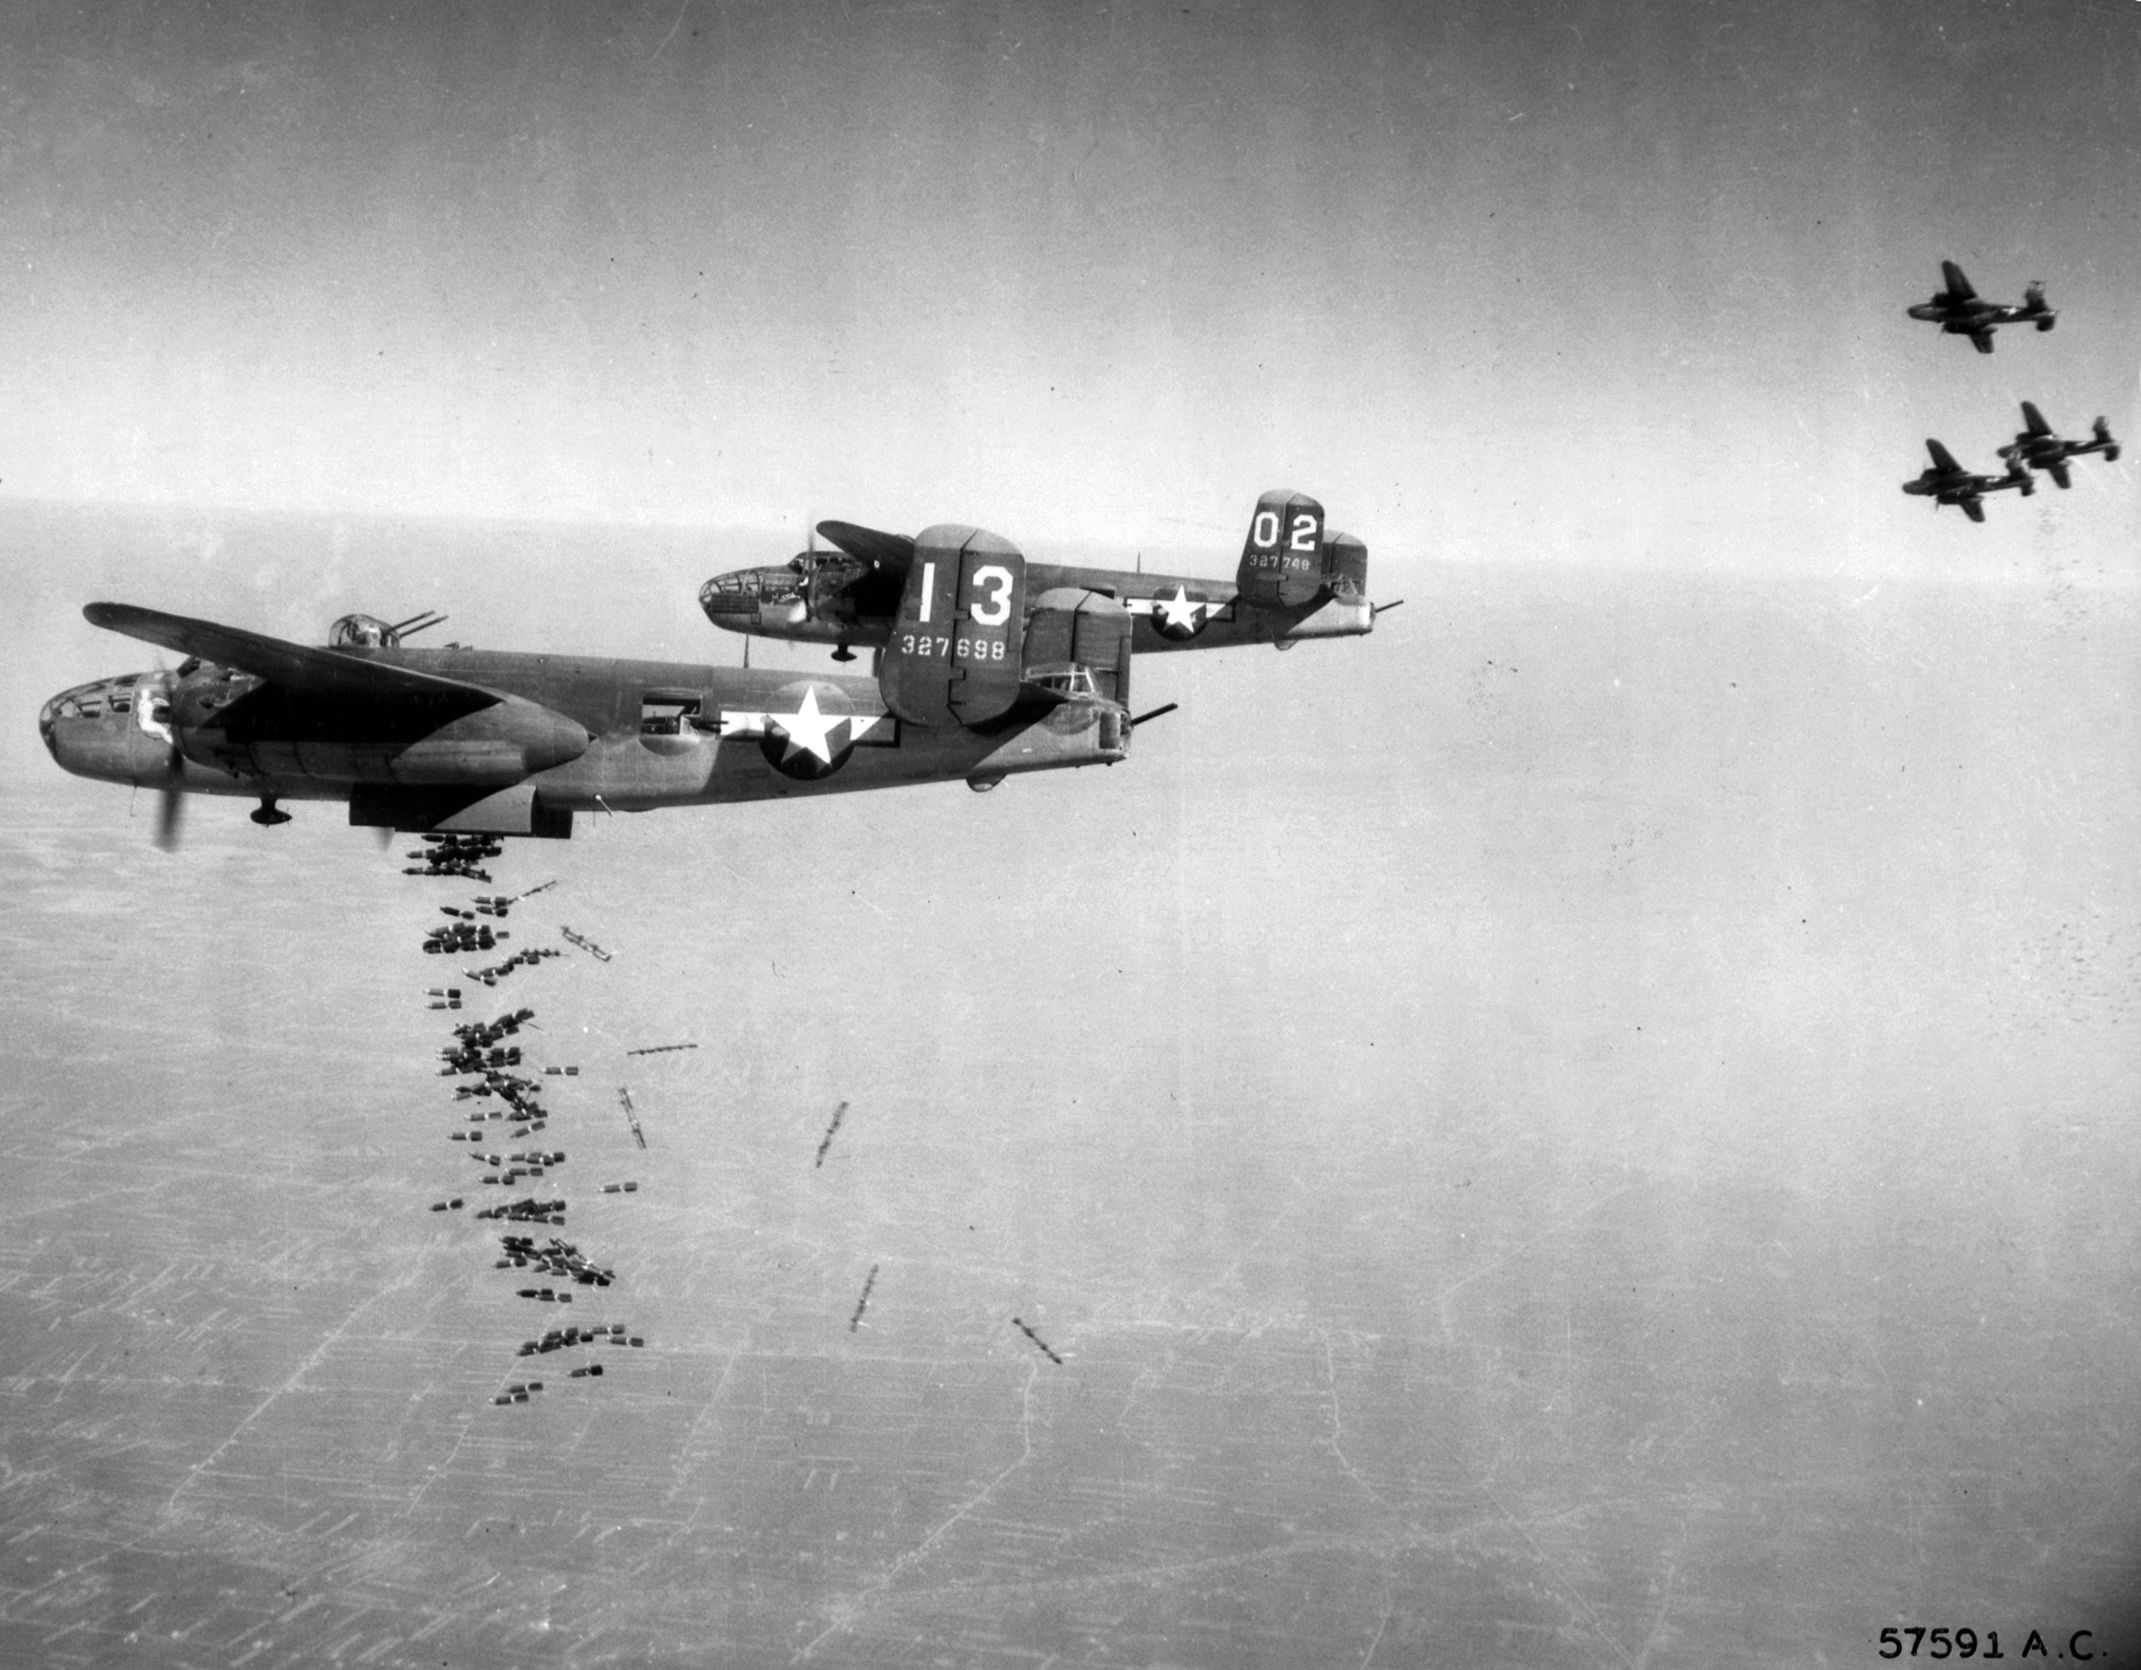 Supporting troops the British Eighth Army fighting the Germans near Lake Comacchio, Italy, B-25 Mitchell No. 13 of the U.S. Twelfth Air Force unleashes its bombload on Nazi troop concentrations below. 